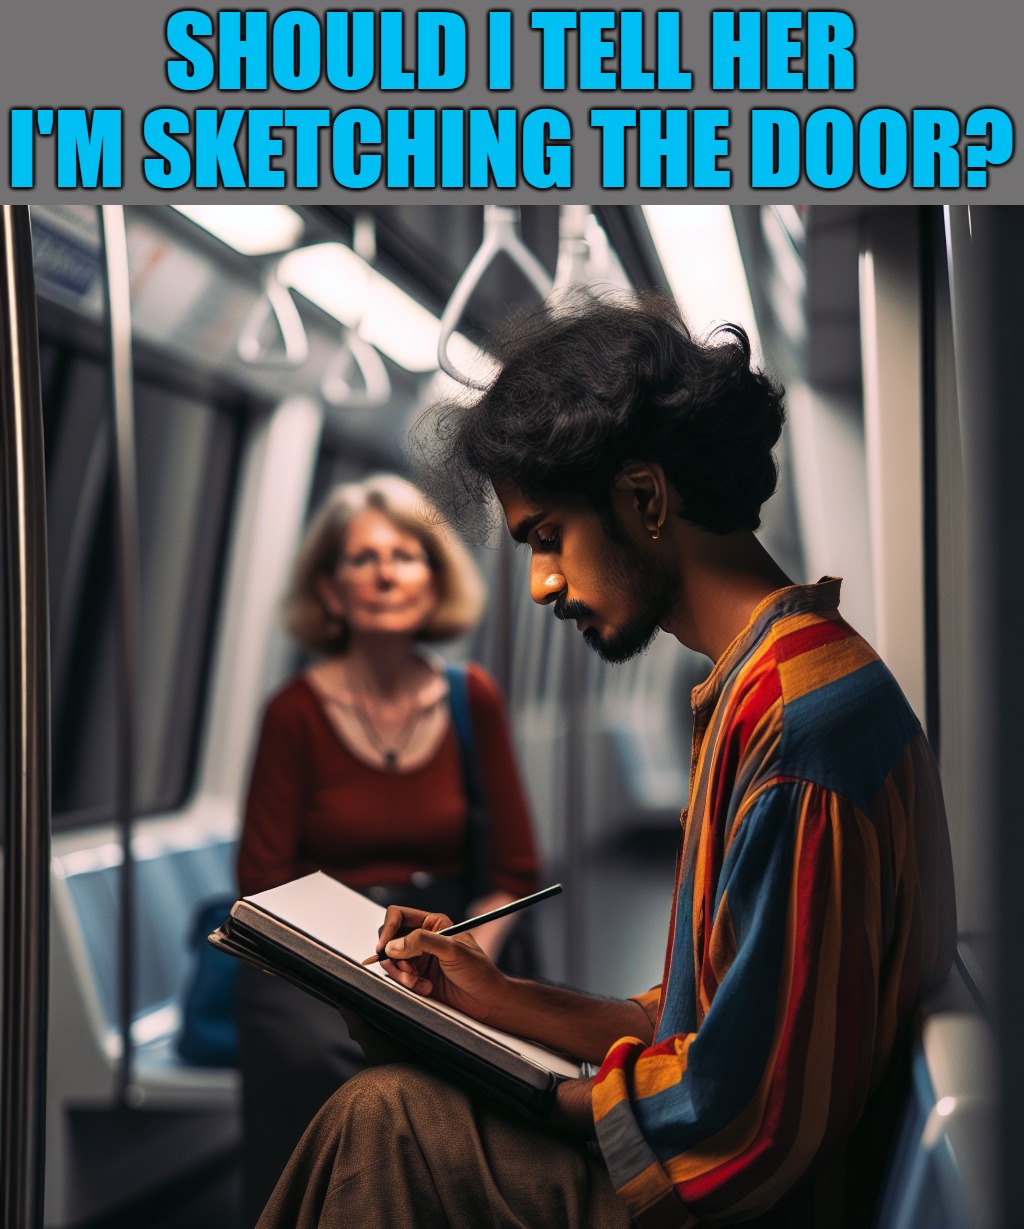 Should I tell her? | SHOULD I TELL HER I'M SKETCHING THE DOOR? | image tagged in sketching a subway door,kewlew | made w/ Imgflip meme maker